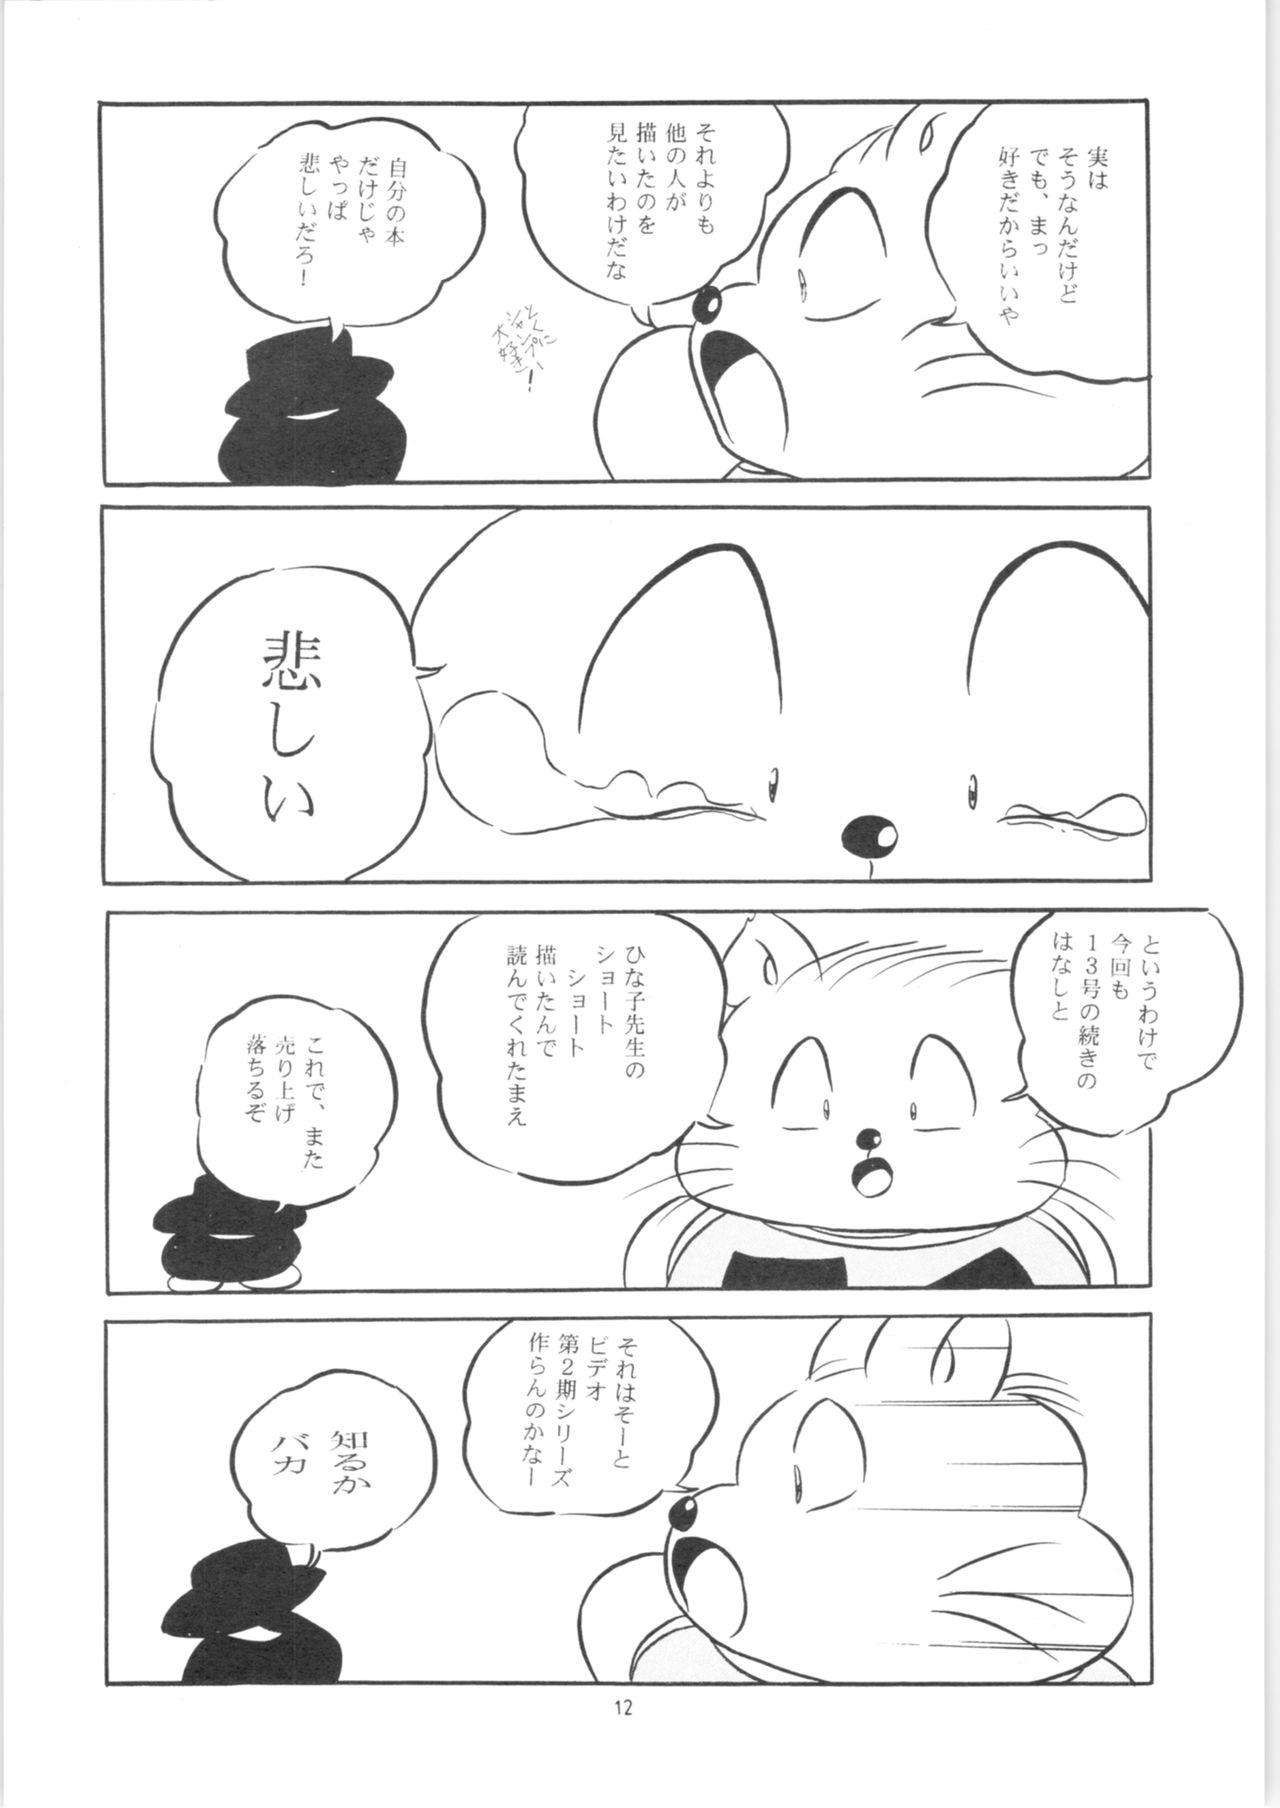 [C-COMPANY] C-COMPANY SPECIAL STAGE 14 (Ranma 1/2) page 13 full